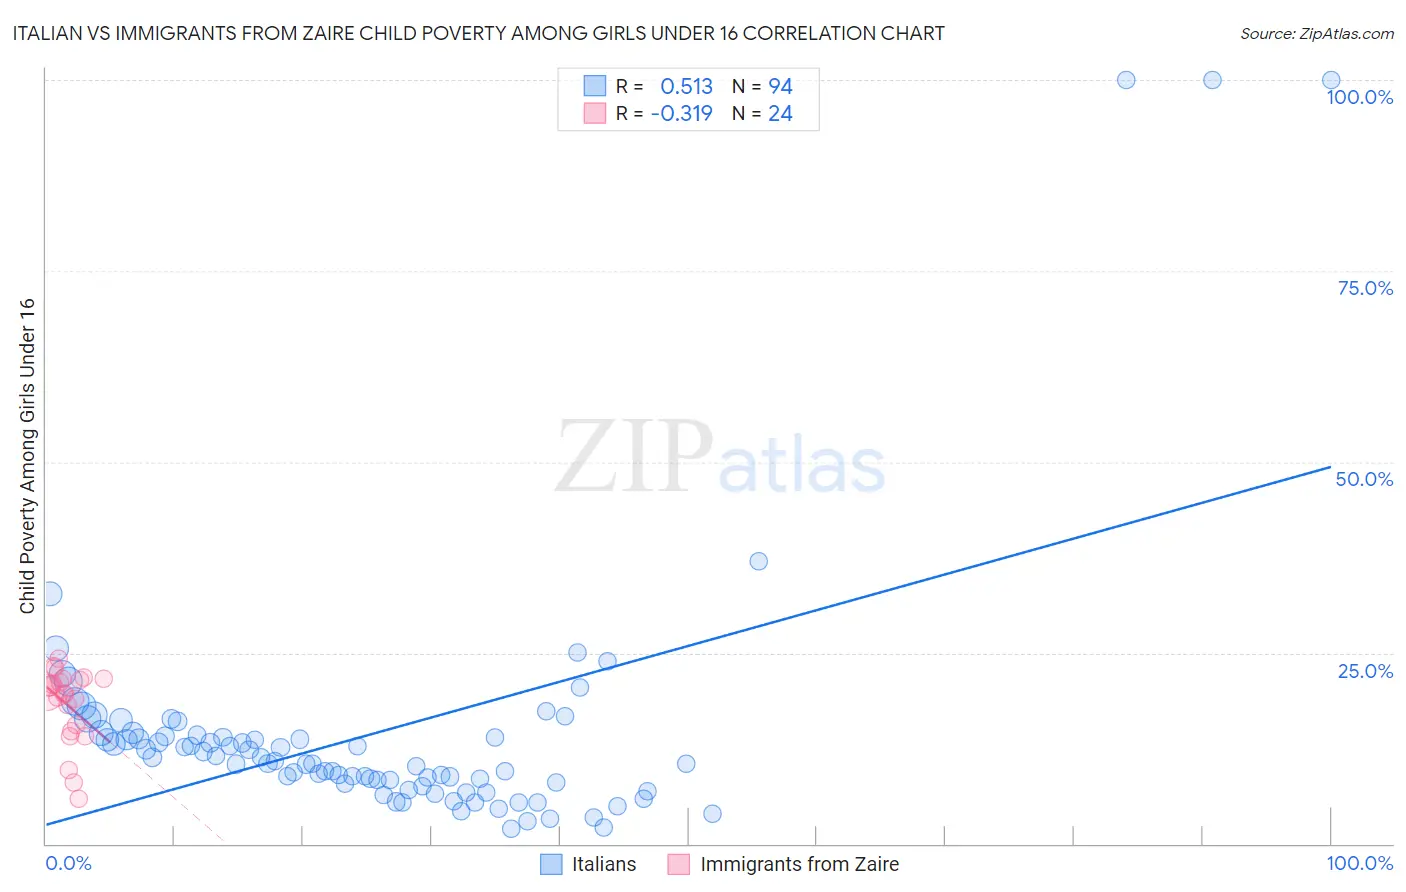 Italian vs Immigrants from Zaire Child Poverty Among Girls Under 16